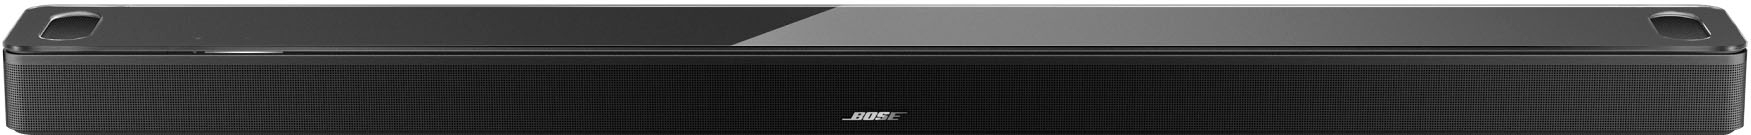 Bose Smart Atmos Black Dolby Best Buy with 882963-1100 Ultra and Voice - Soundbar Assistant